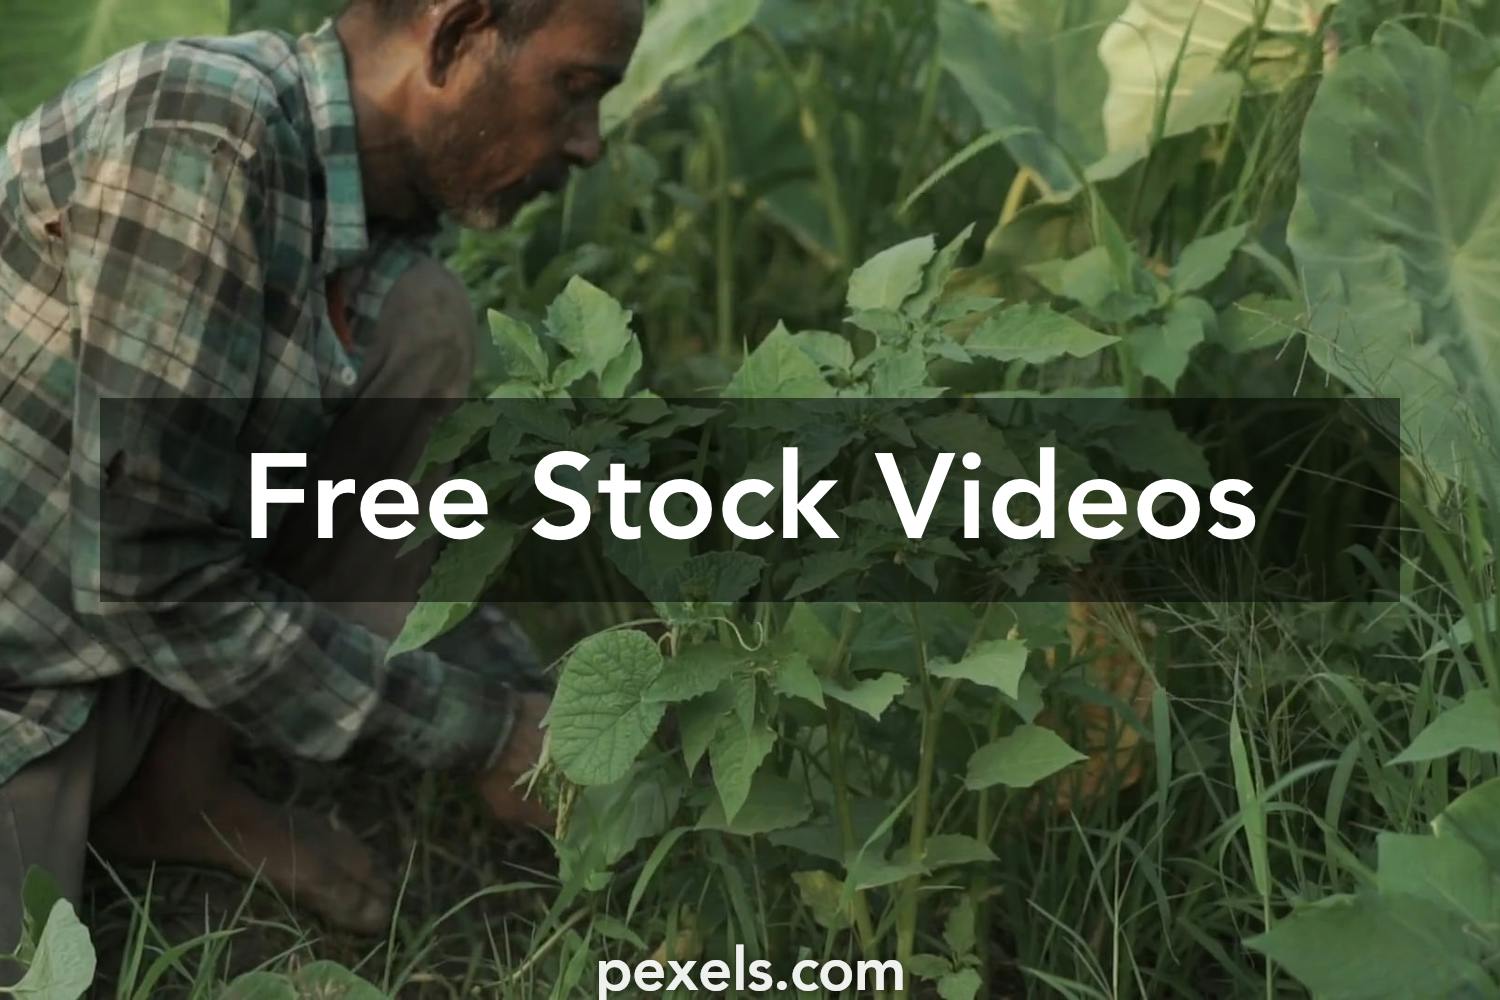 Old Farming Phothos Videos, Download The BEST Free 4k Stock Video ...